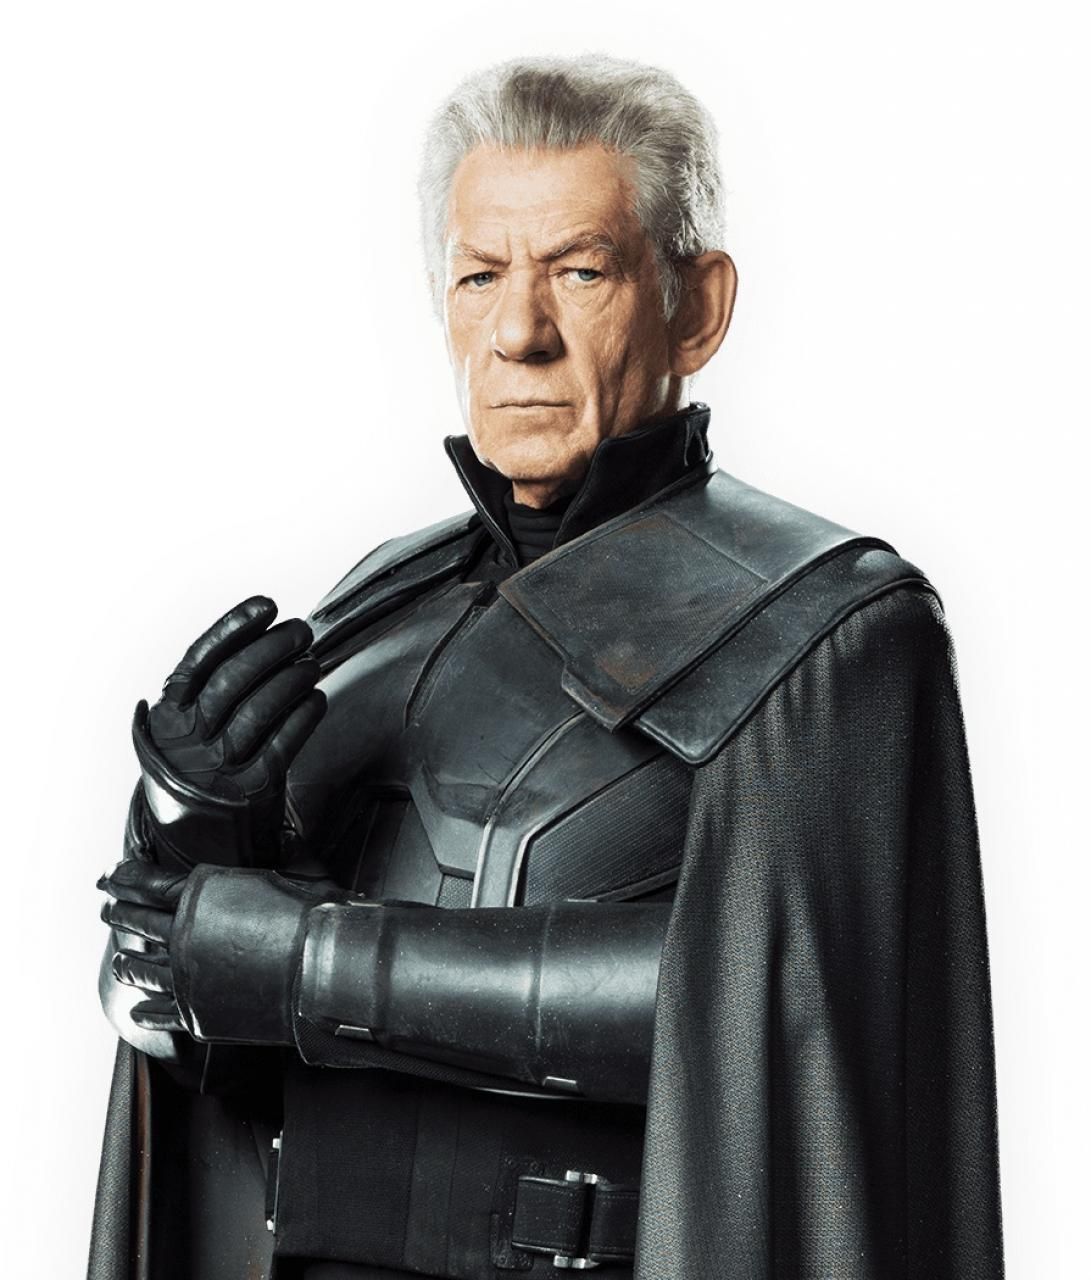 X-men: Days of Future Past character photo #6